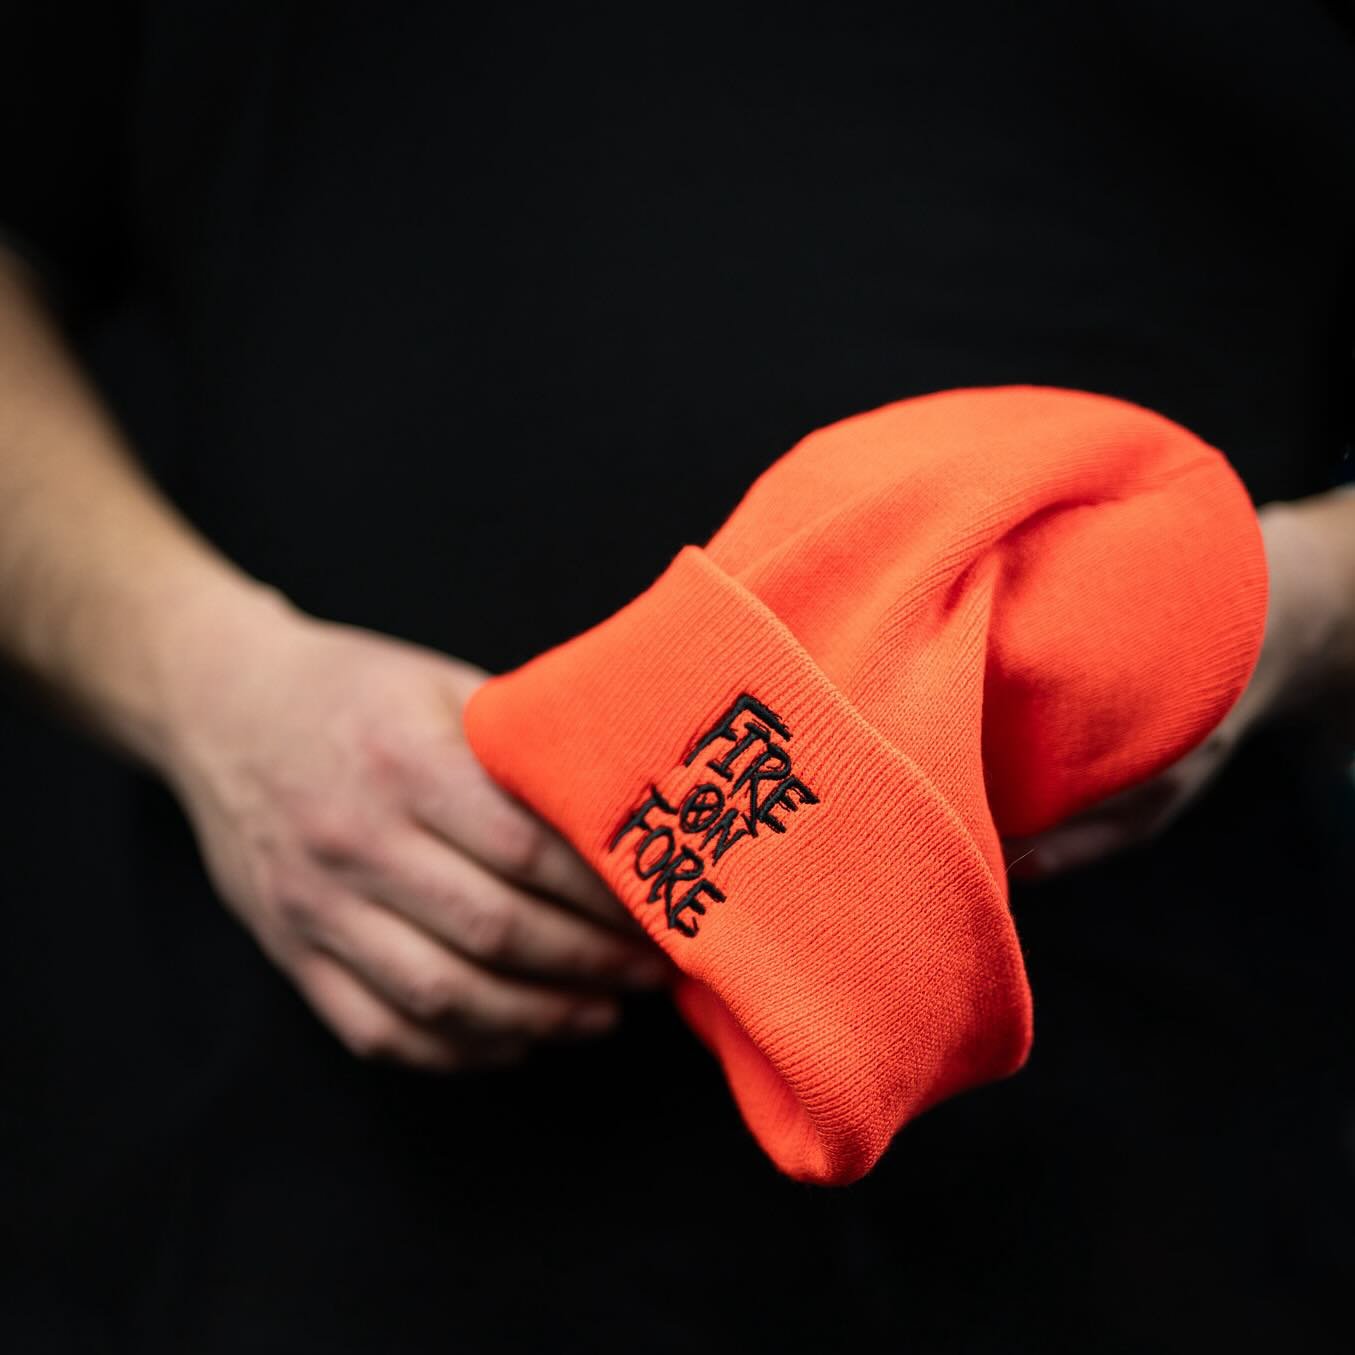 Feels like it&rsquo;s always beanie season in #maine
What color are you going for? 
Current Inventory: Maroon, sand, black, white, hunter orange, and pink